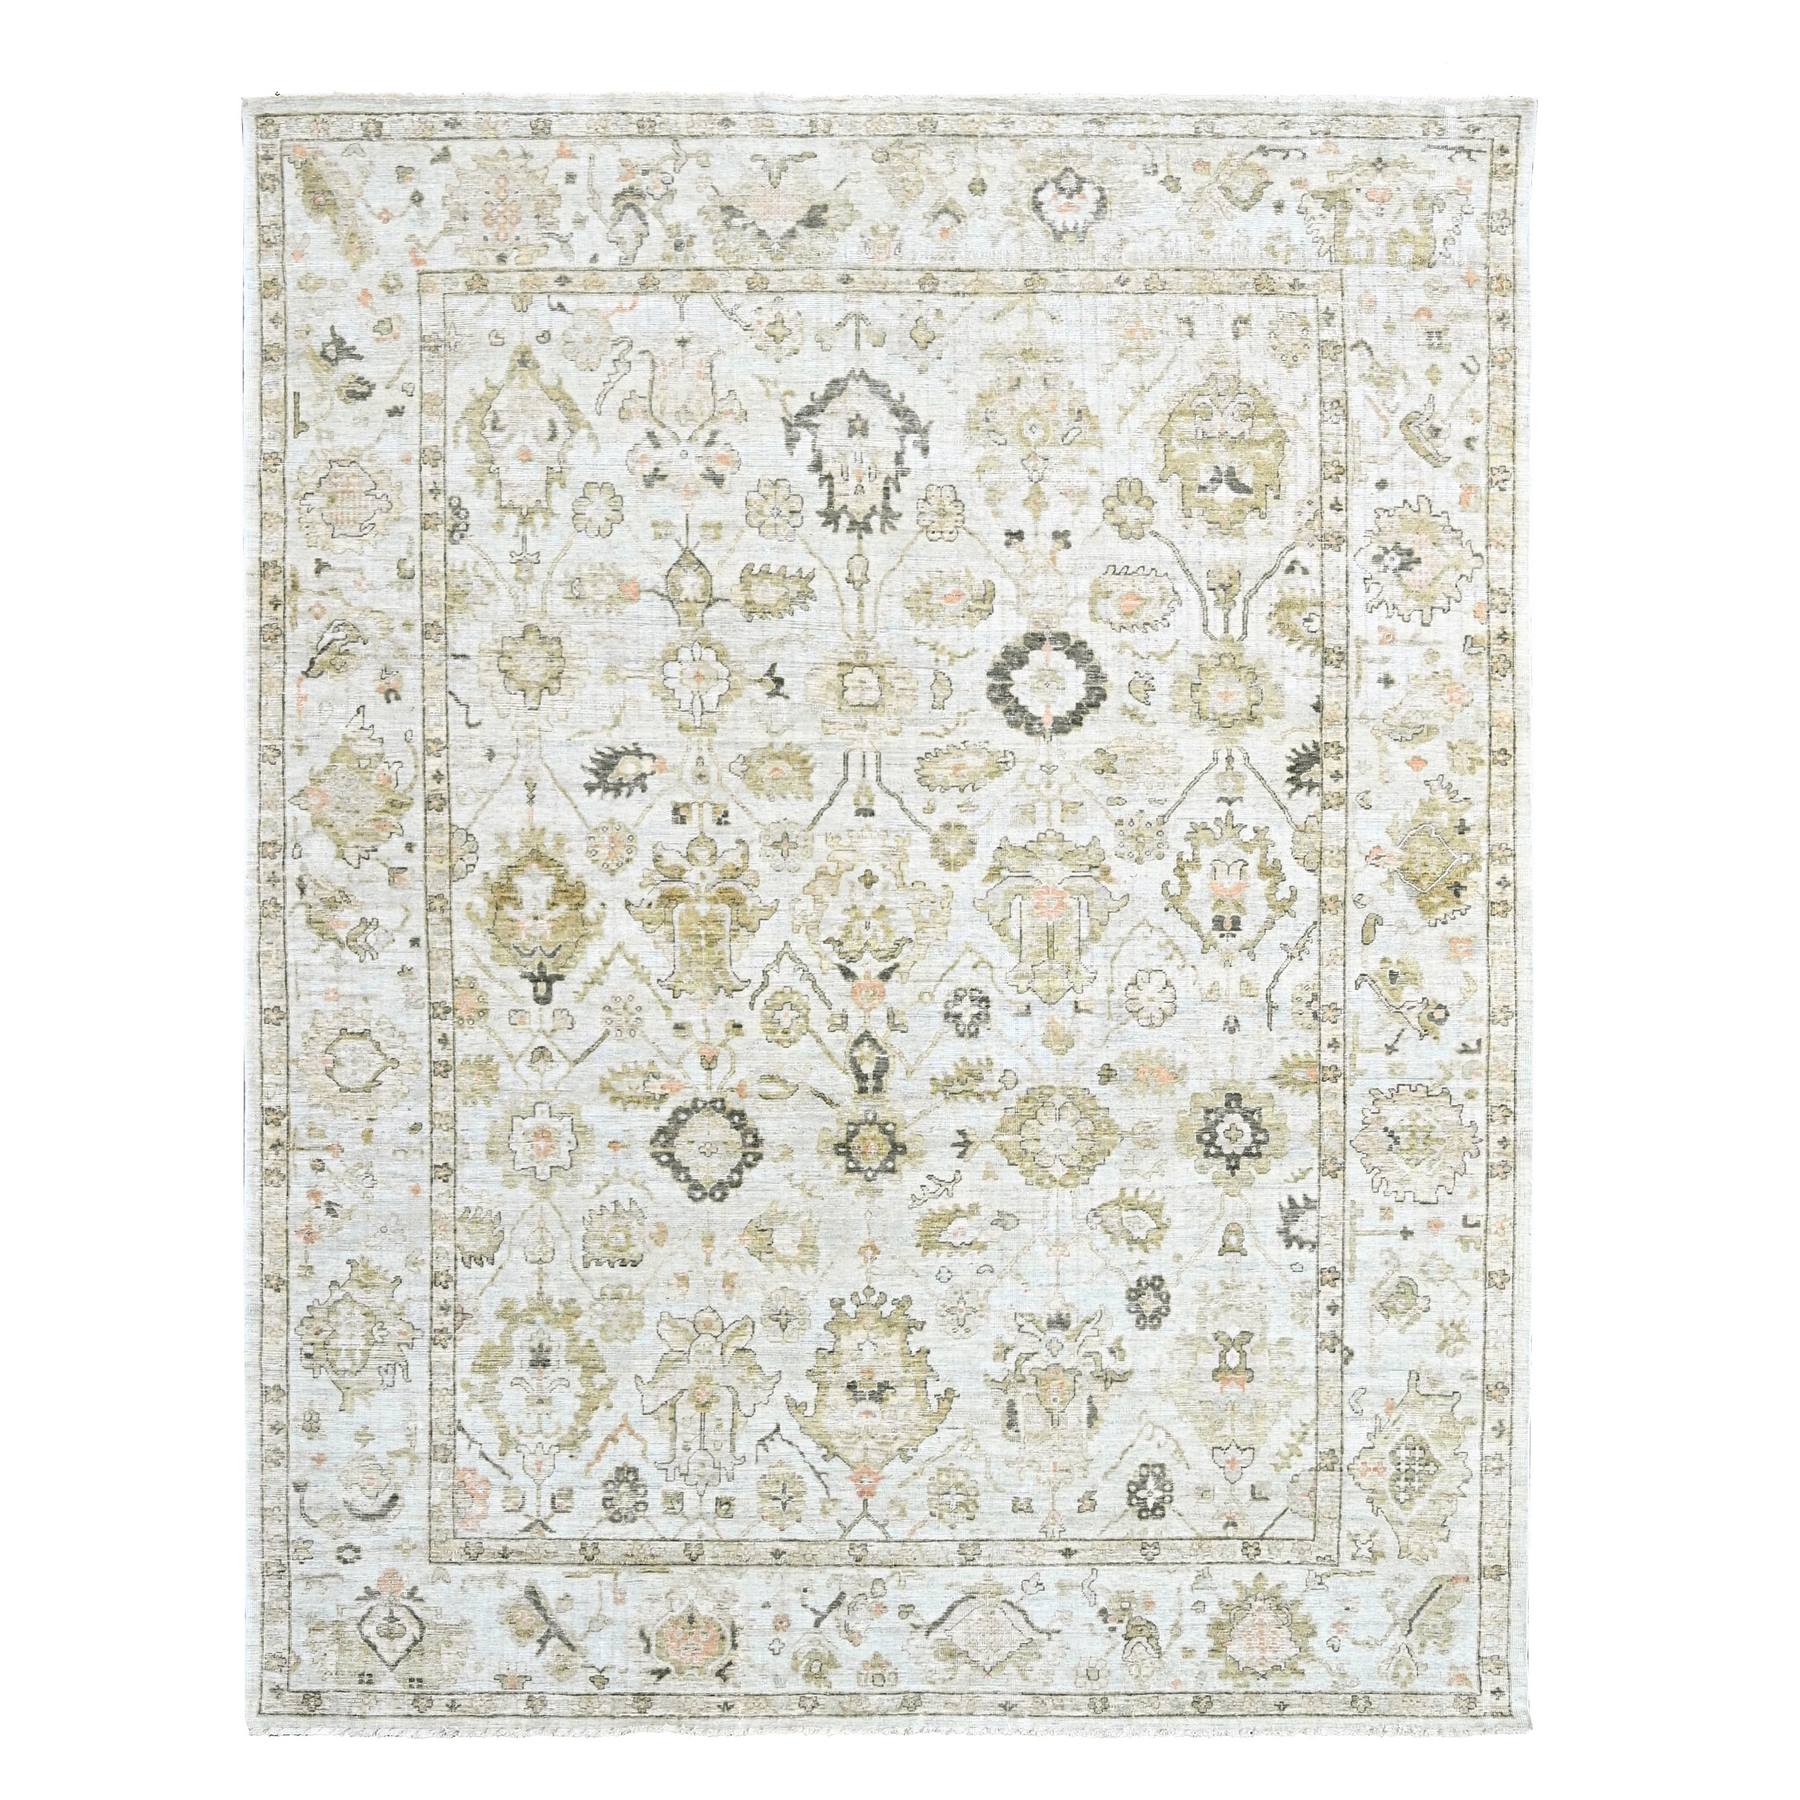 Wevet White, Hand Knotted Persian Zeigler Mahal All Over Design, Sheared Low, 100% Wool, Distressed Look Shaved Thin, Oriental Rug